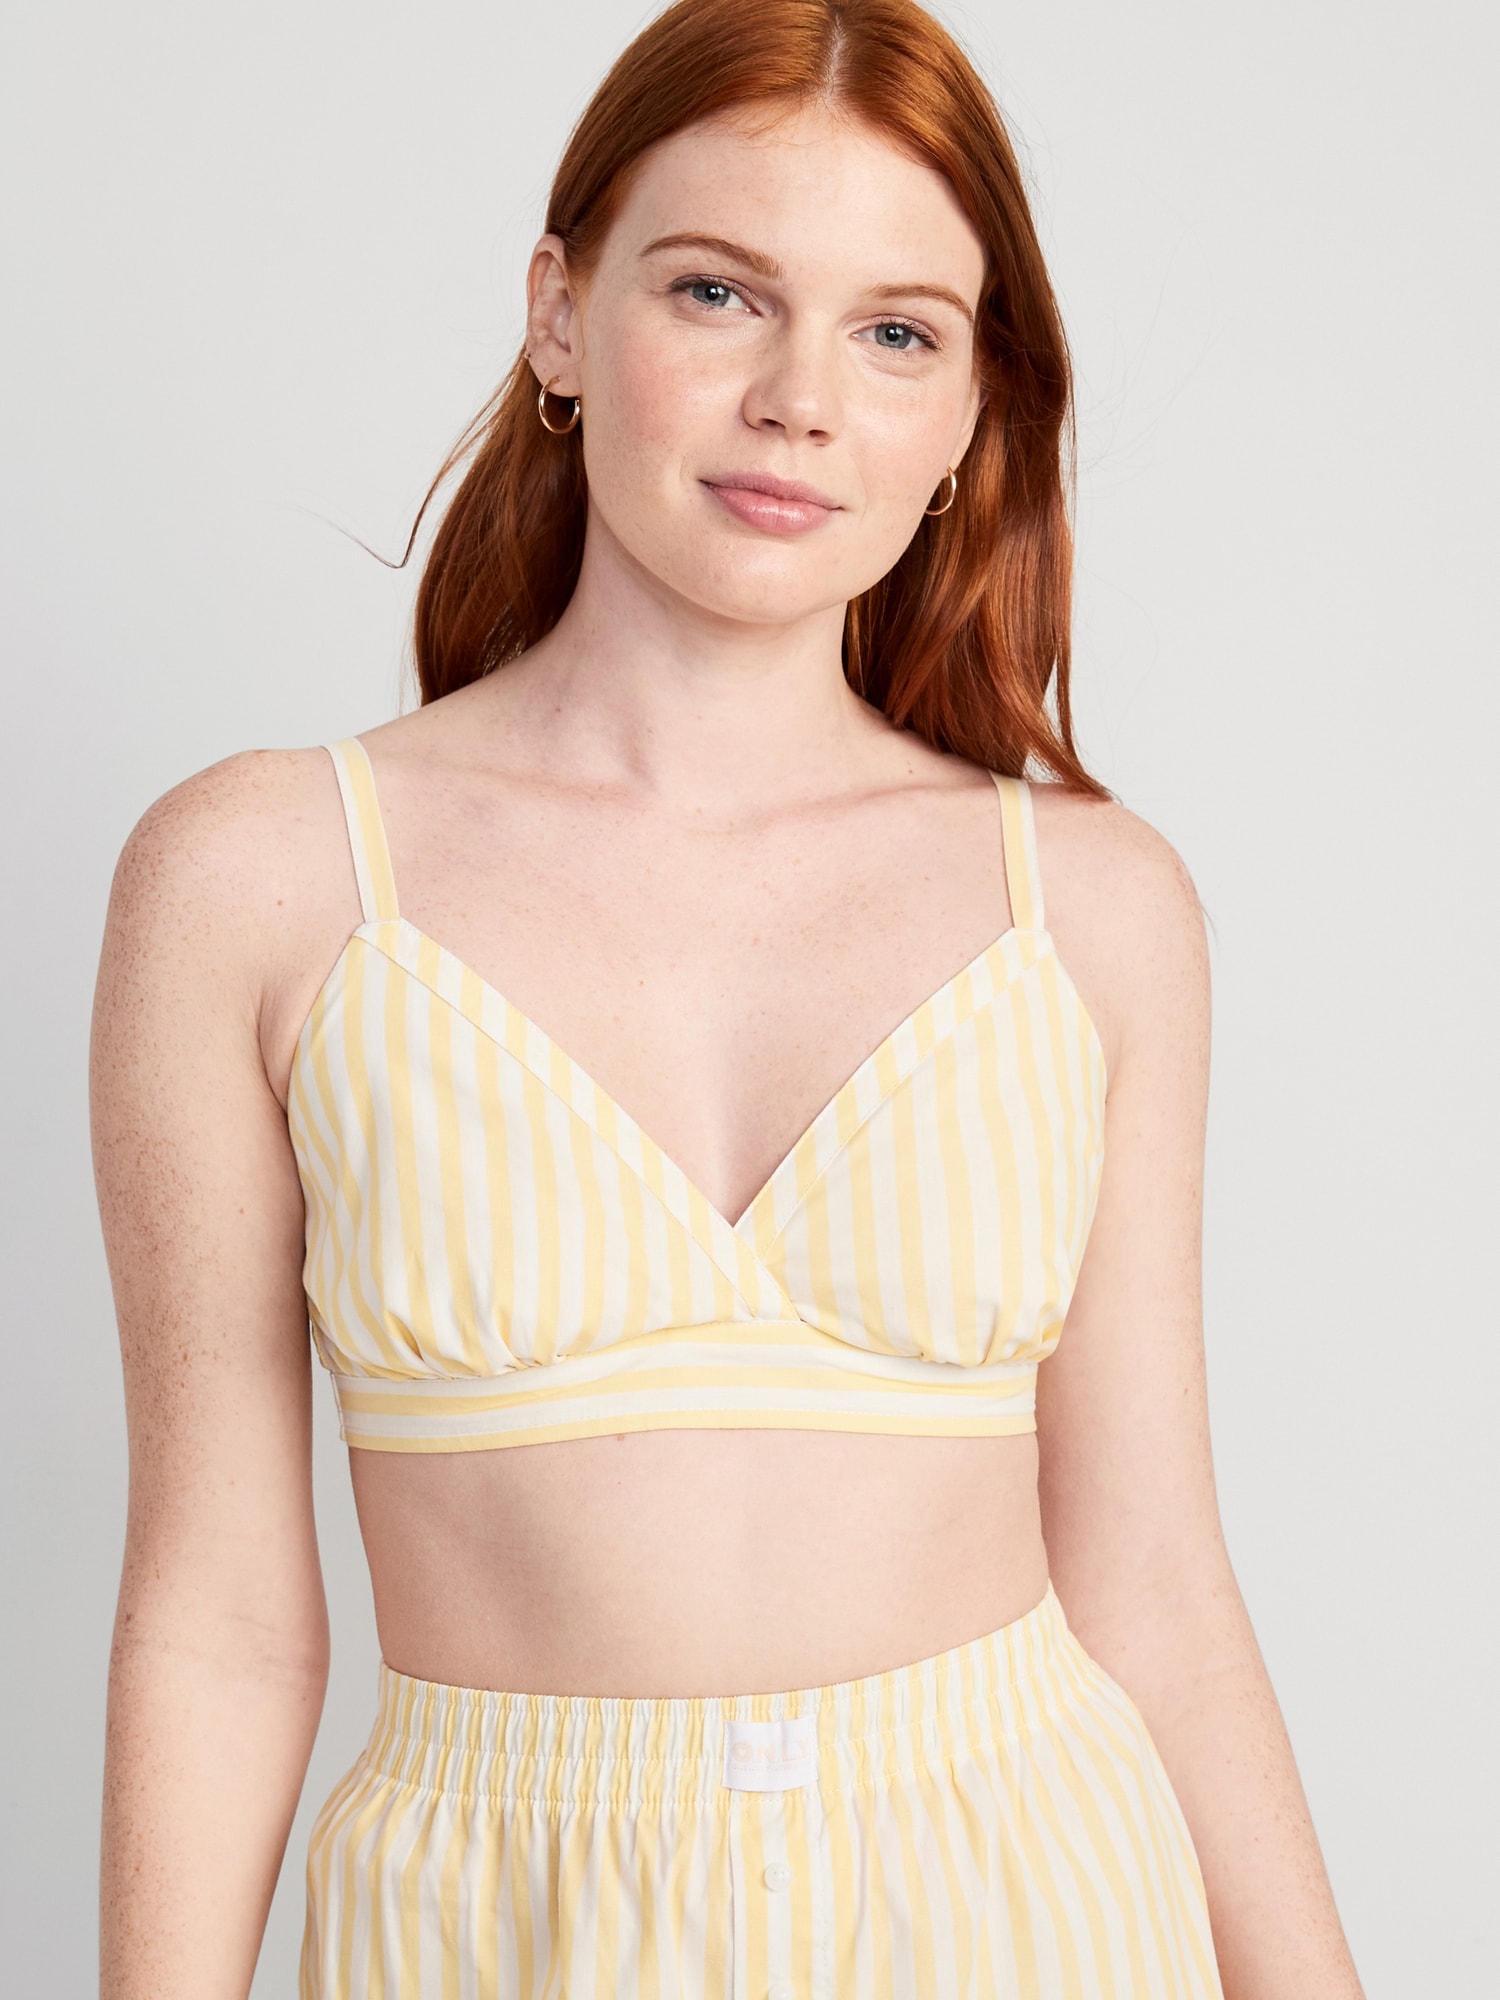 Old Navy Matching Printed Smocked Bralette Top for Women yellow. 1